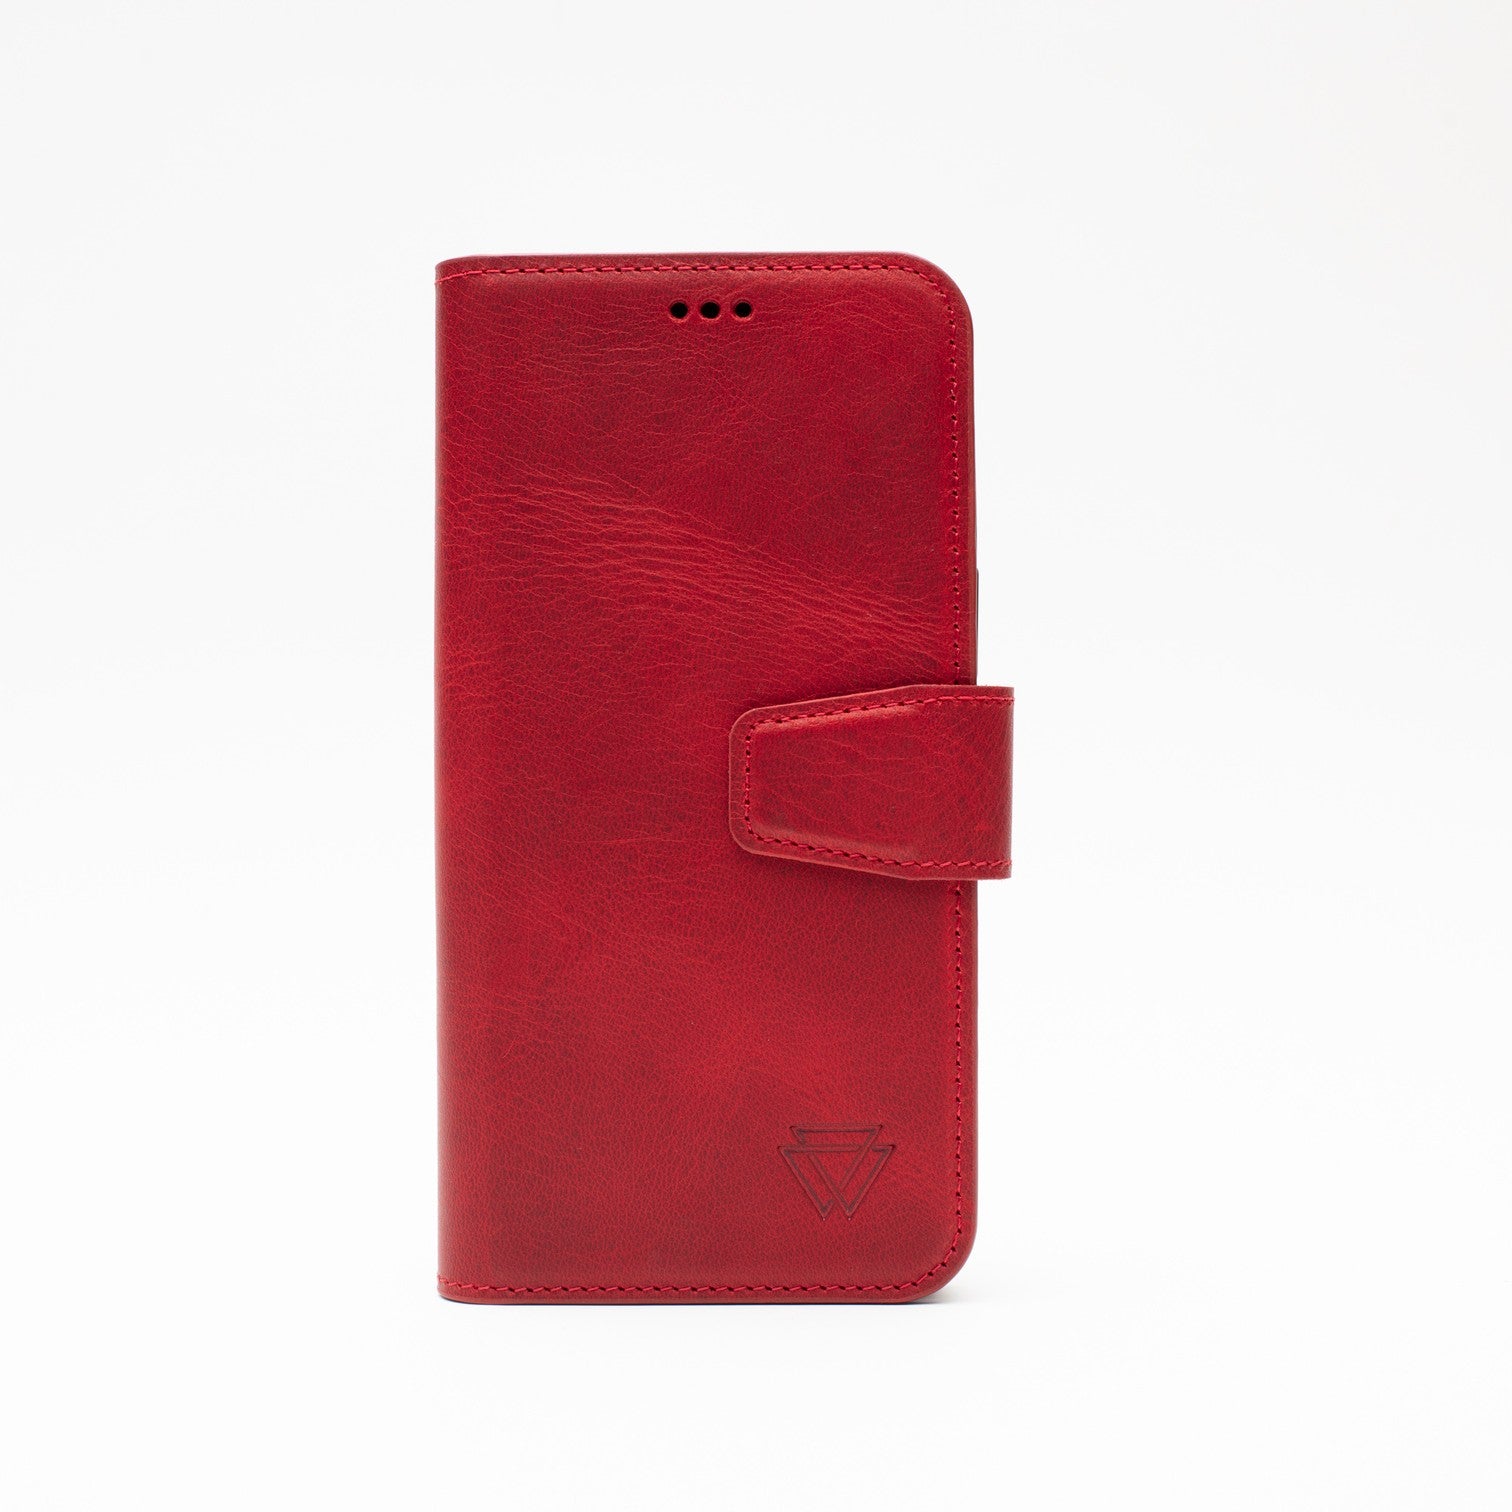 Wachikopa leather Classic iPhone Case for iPhone 12 Pro Red